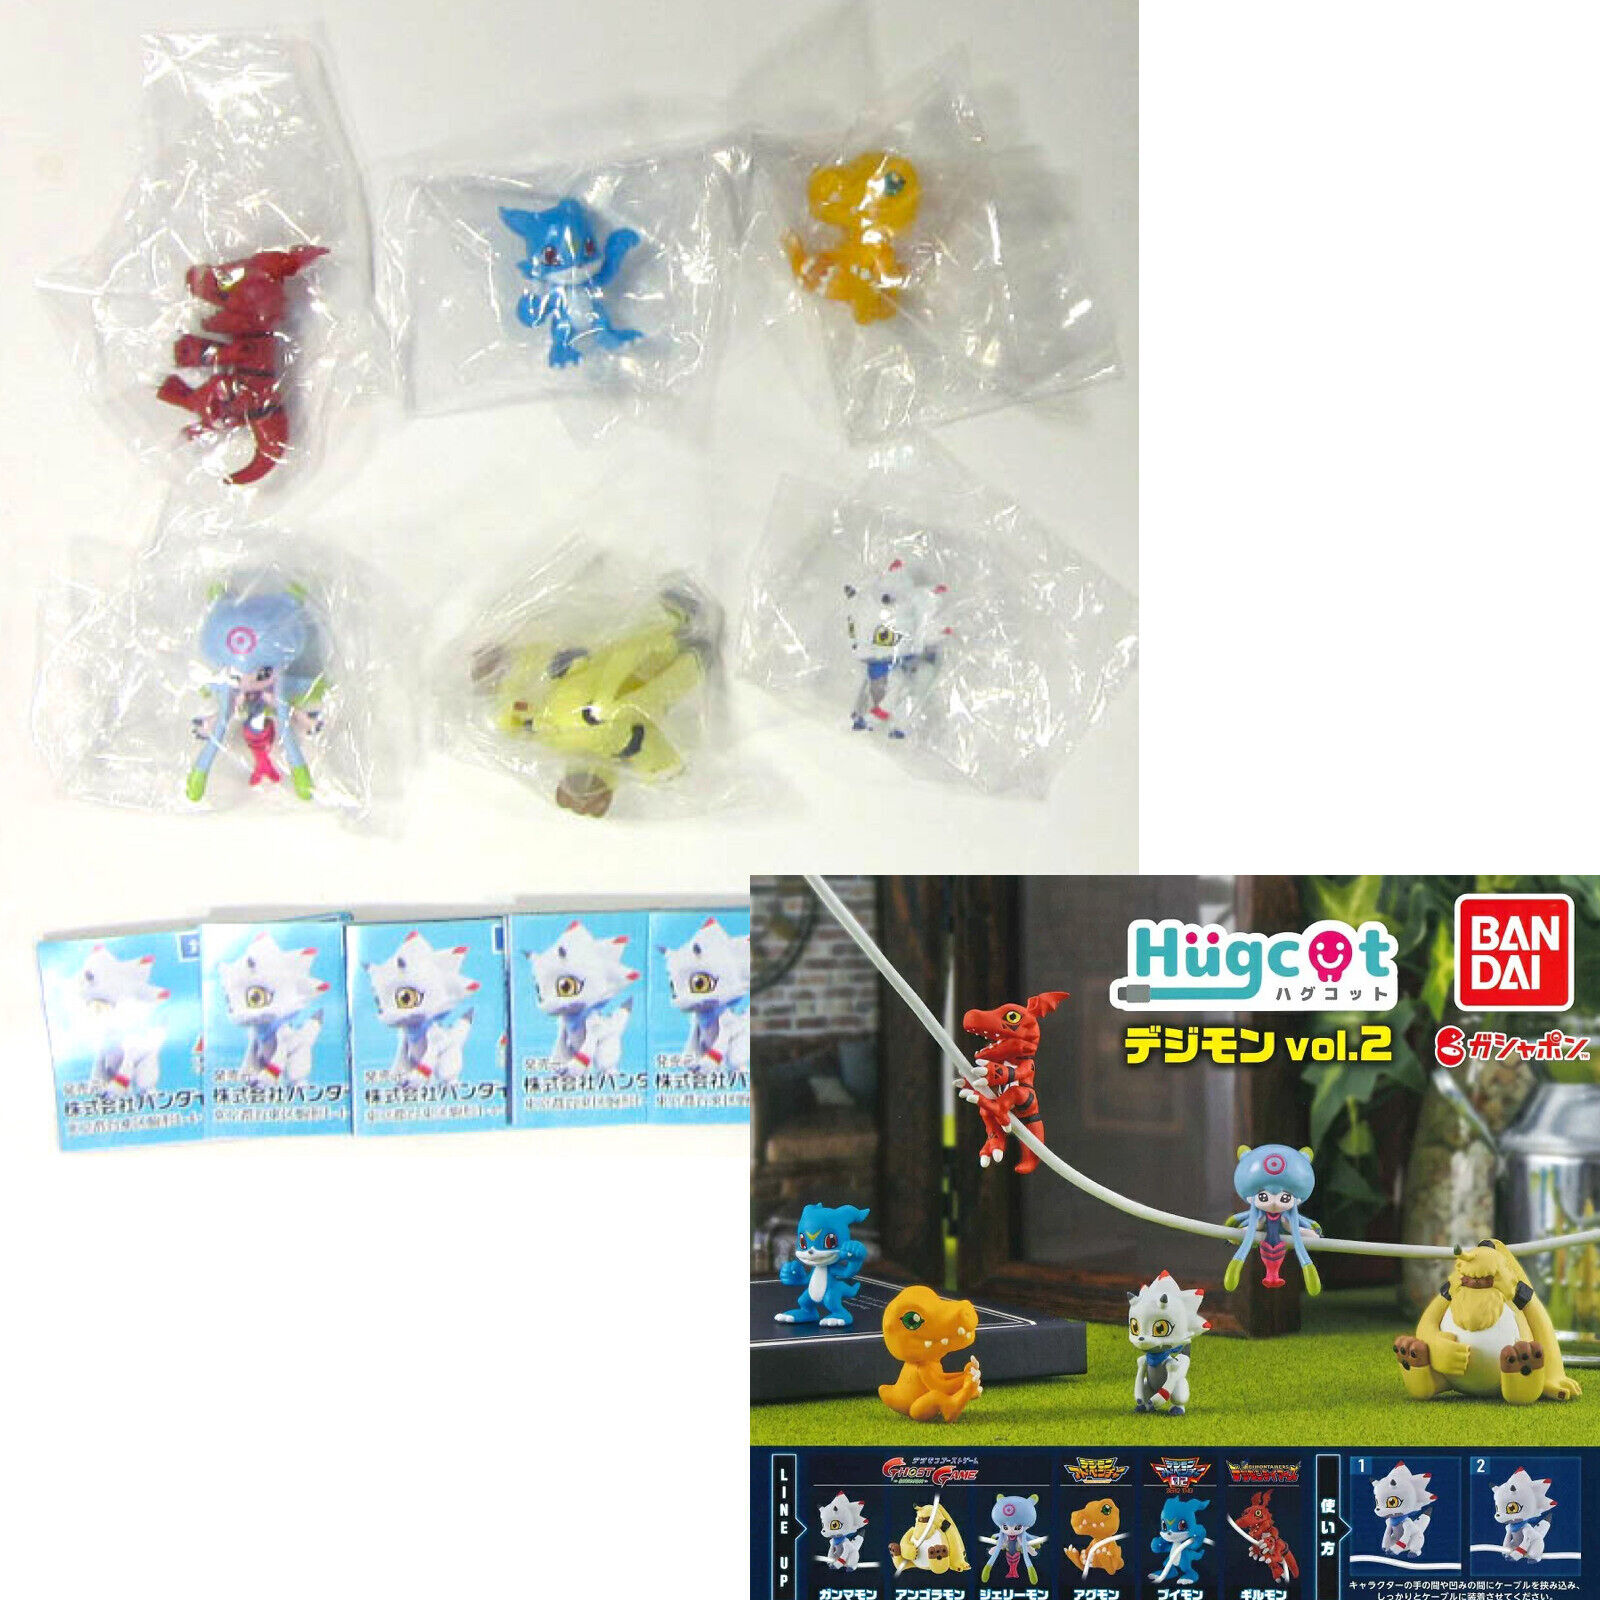 DIGIMON GHOST GAME Hugcot All 6 Type Complete Set Mini Figure Capsule Toy BANDAI